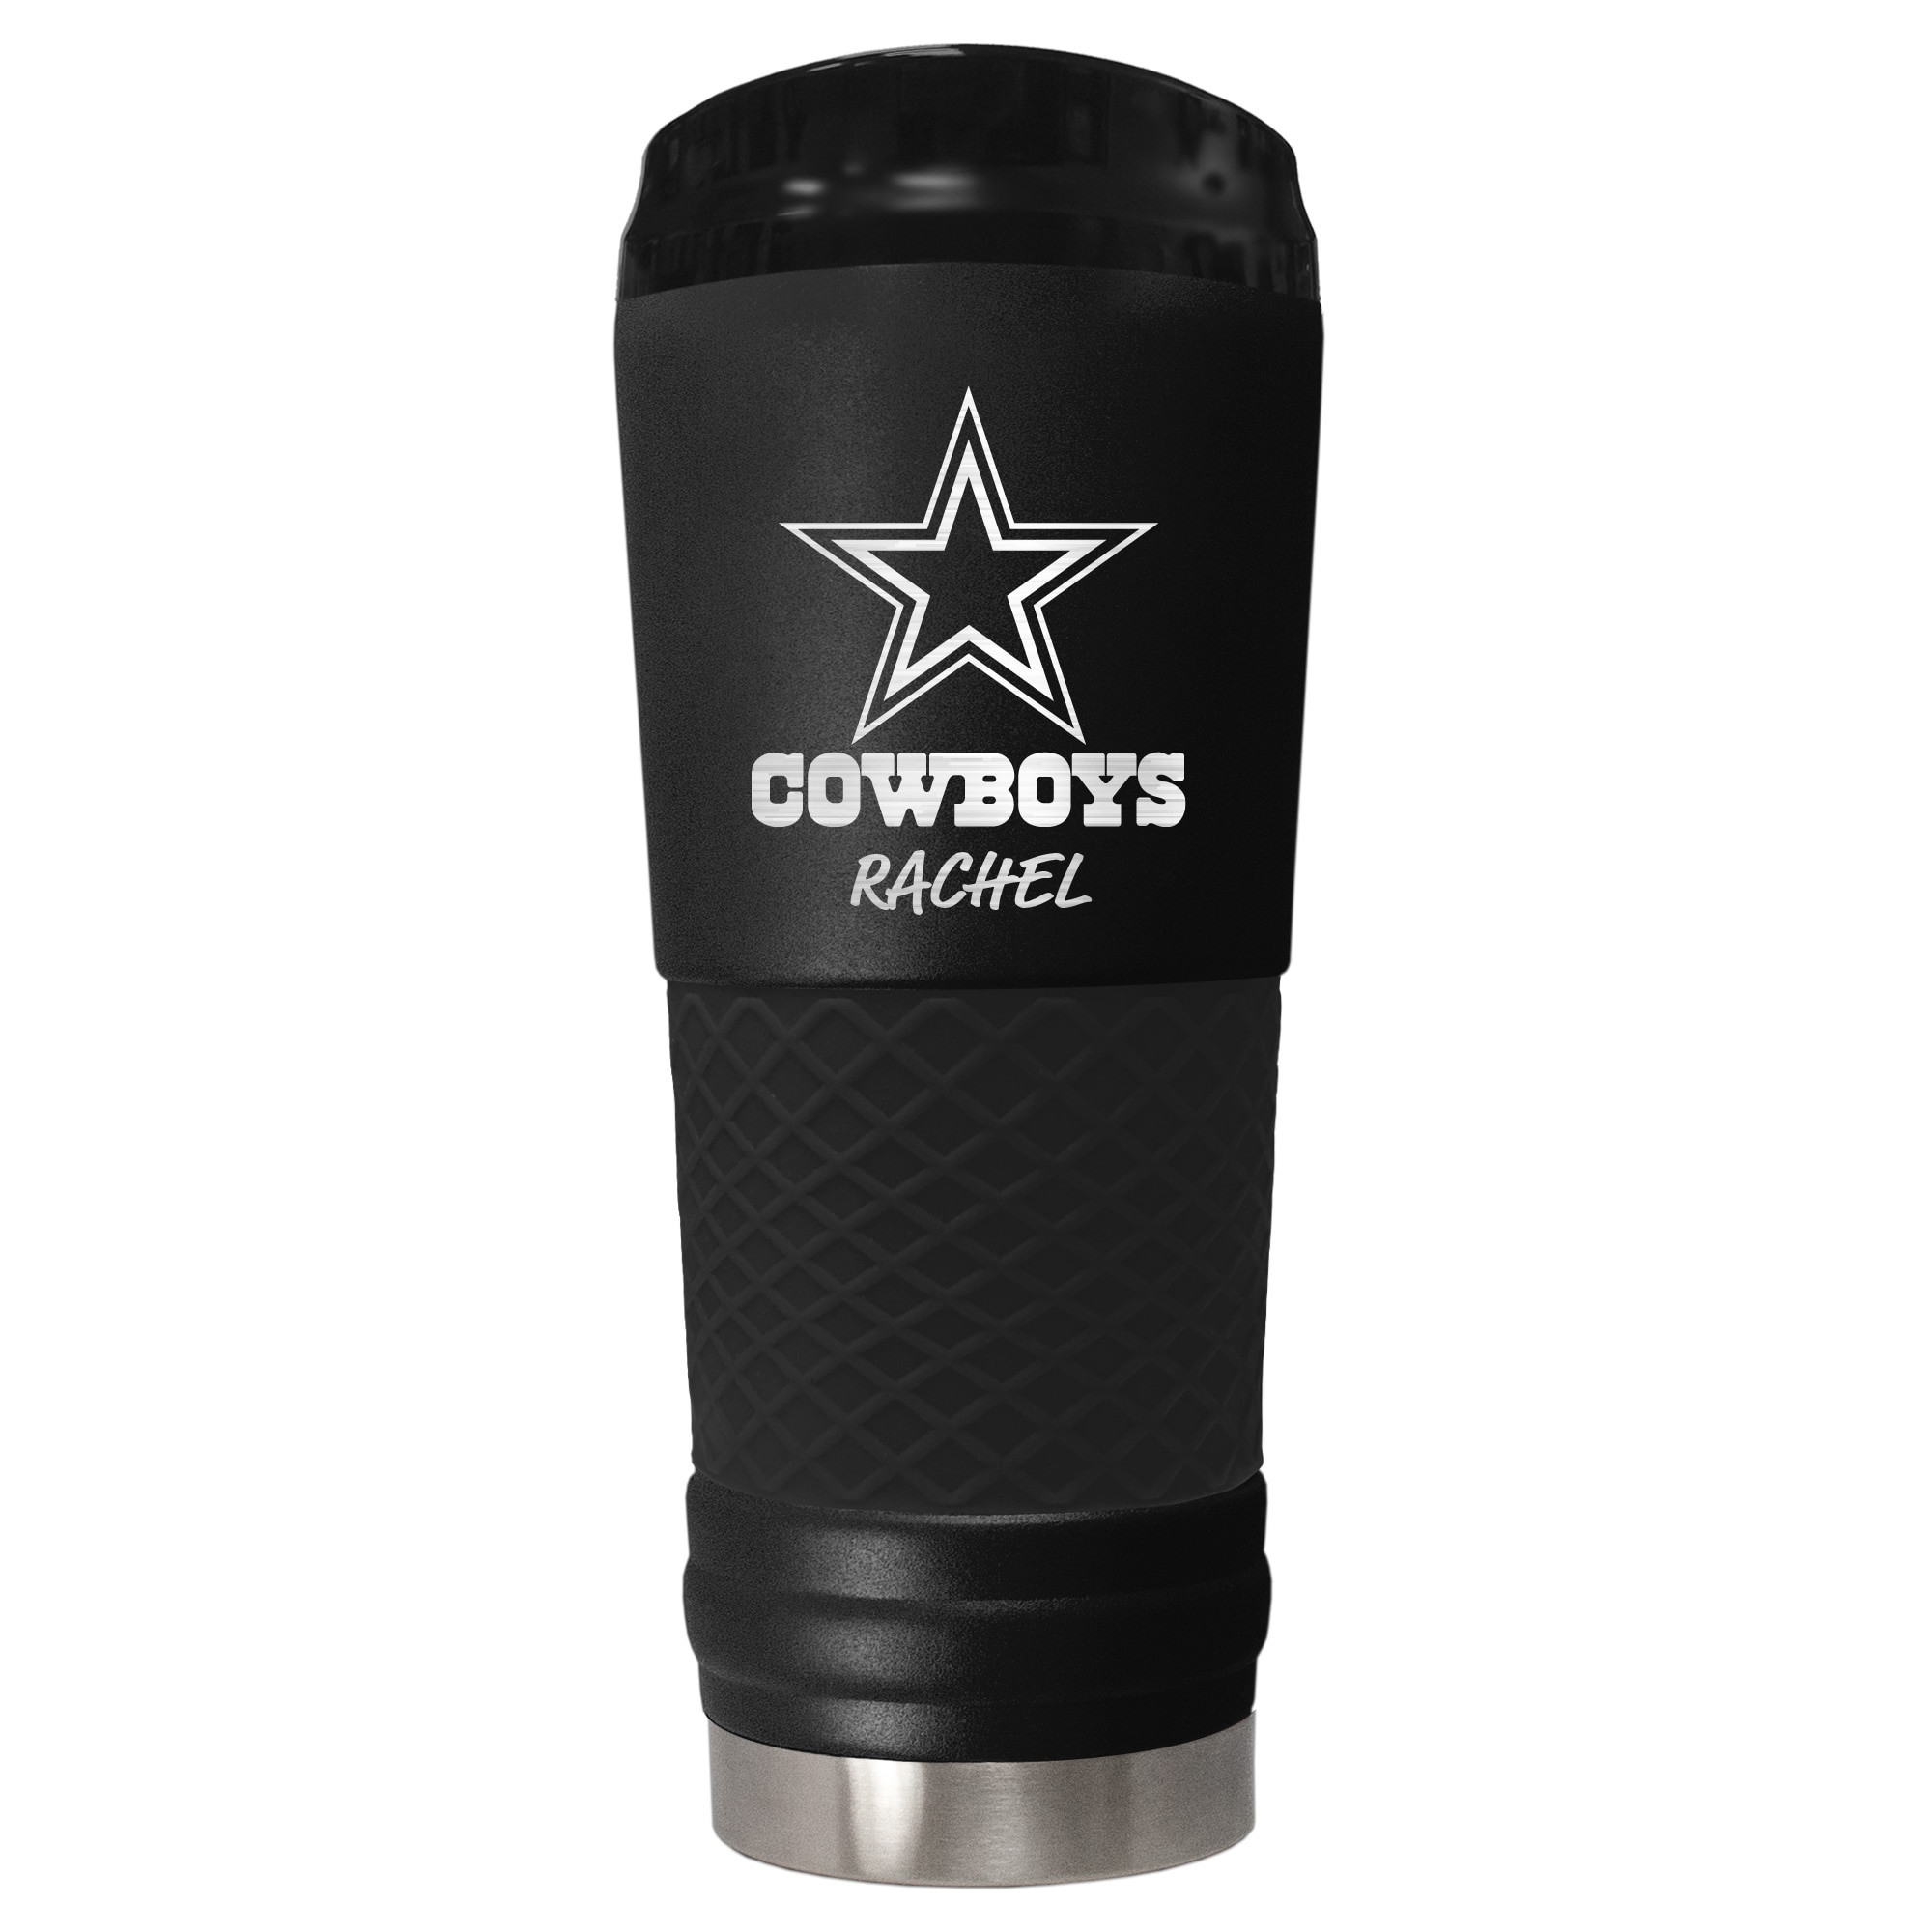 Cowboys Gift Ideas
 15 Cool Gift Ideas for Dallas Cowboys Fans in 2021